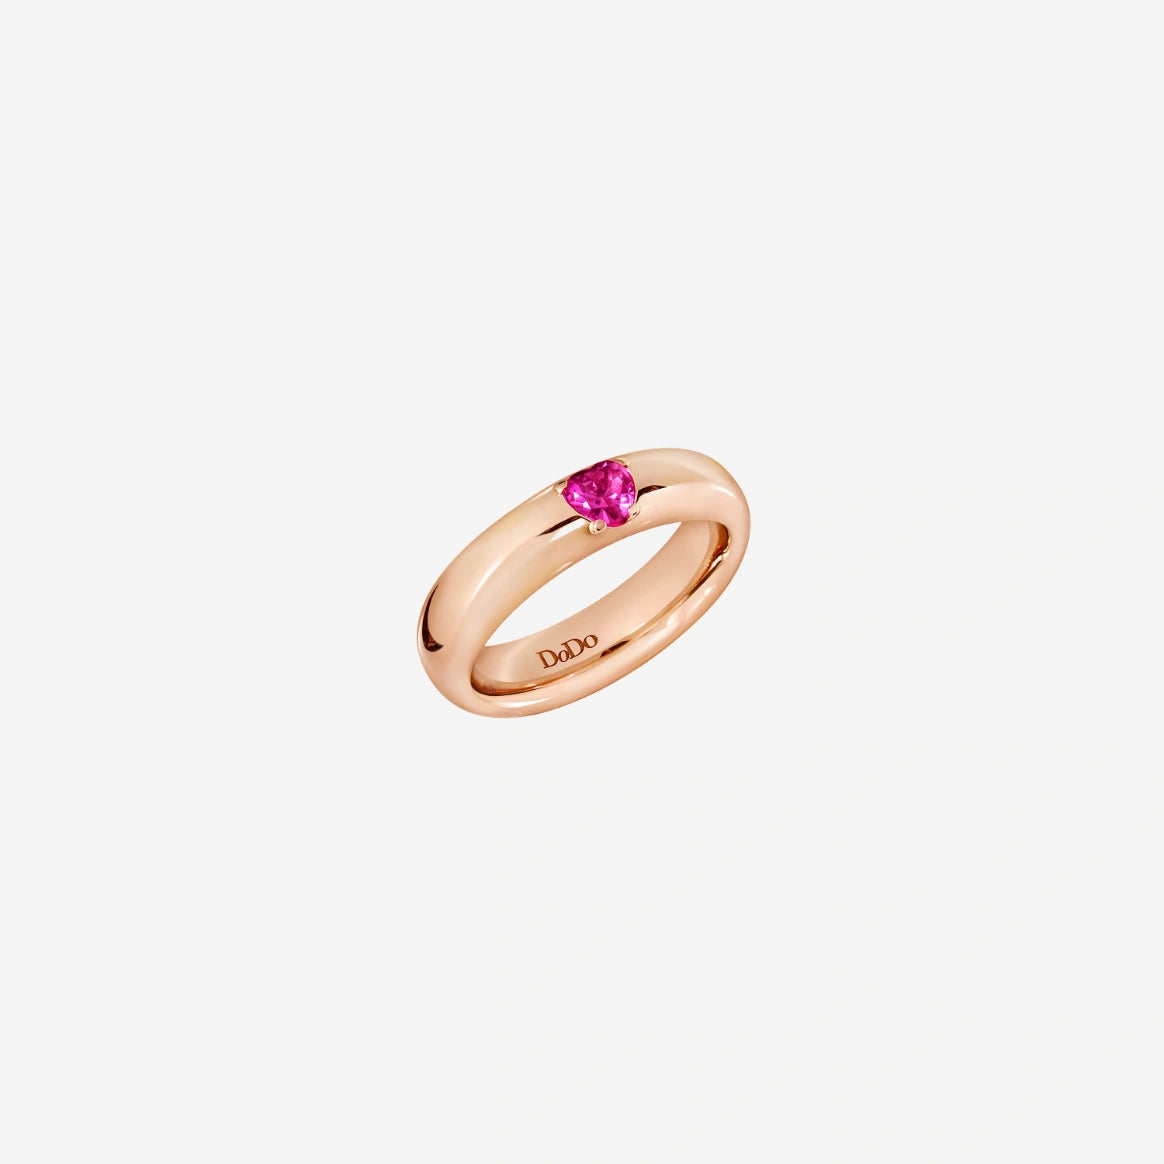 DoDo Heart Ring in 9K Rose Gold and Pink Heart Synthetic Ruby - Orsini Jewellers